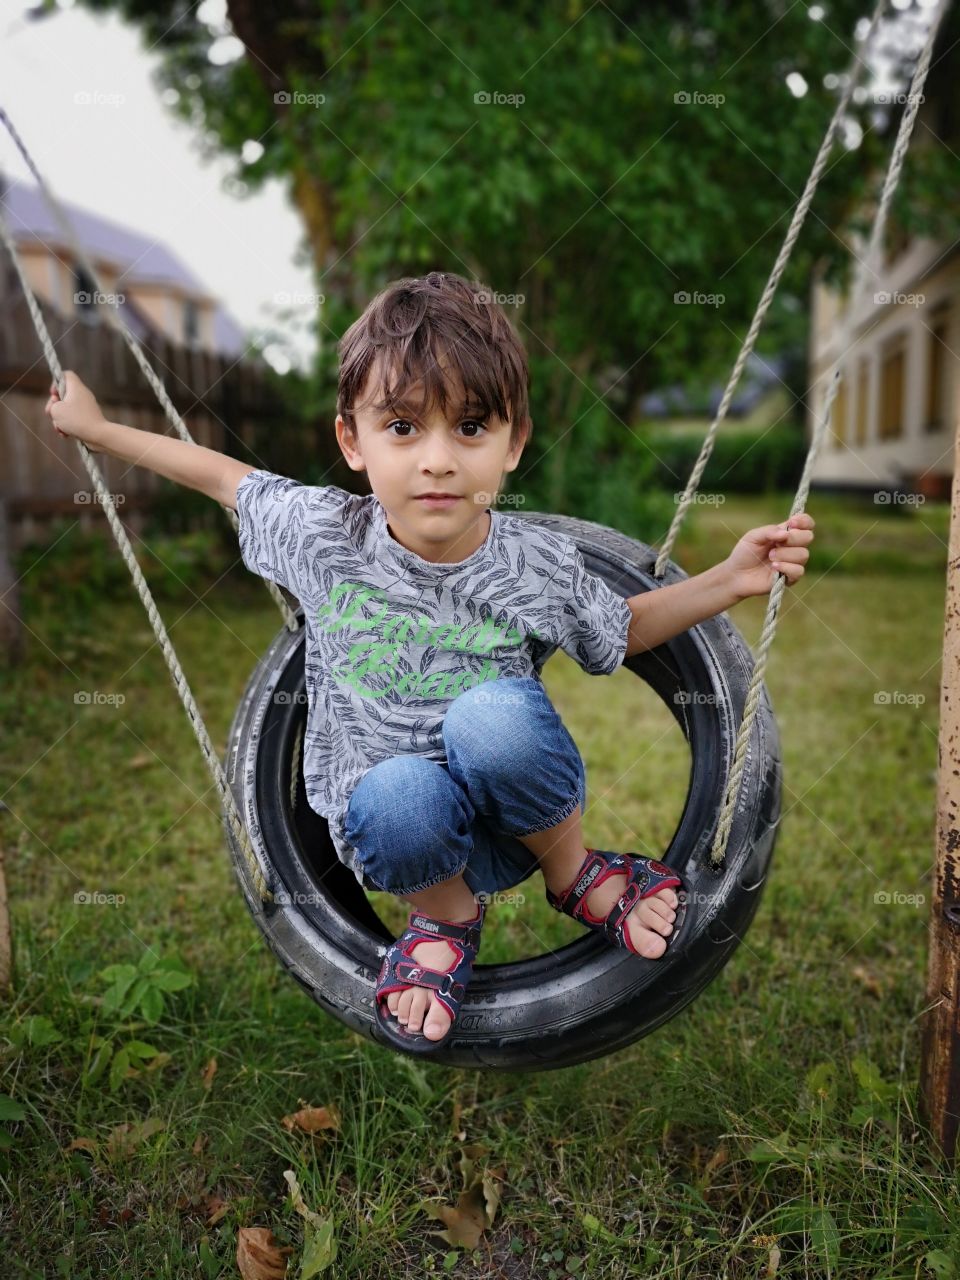 Cute boy on swing made of recycled car tire